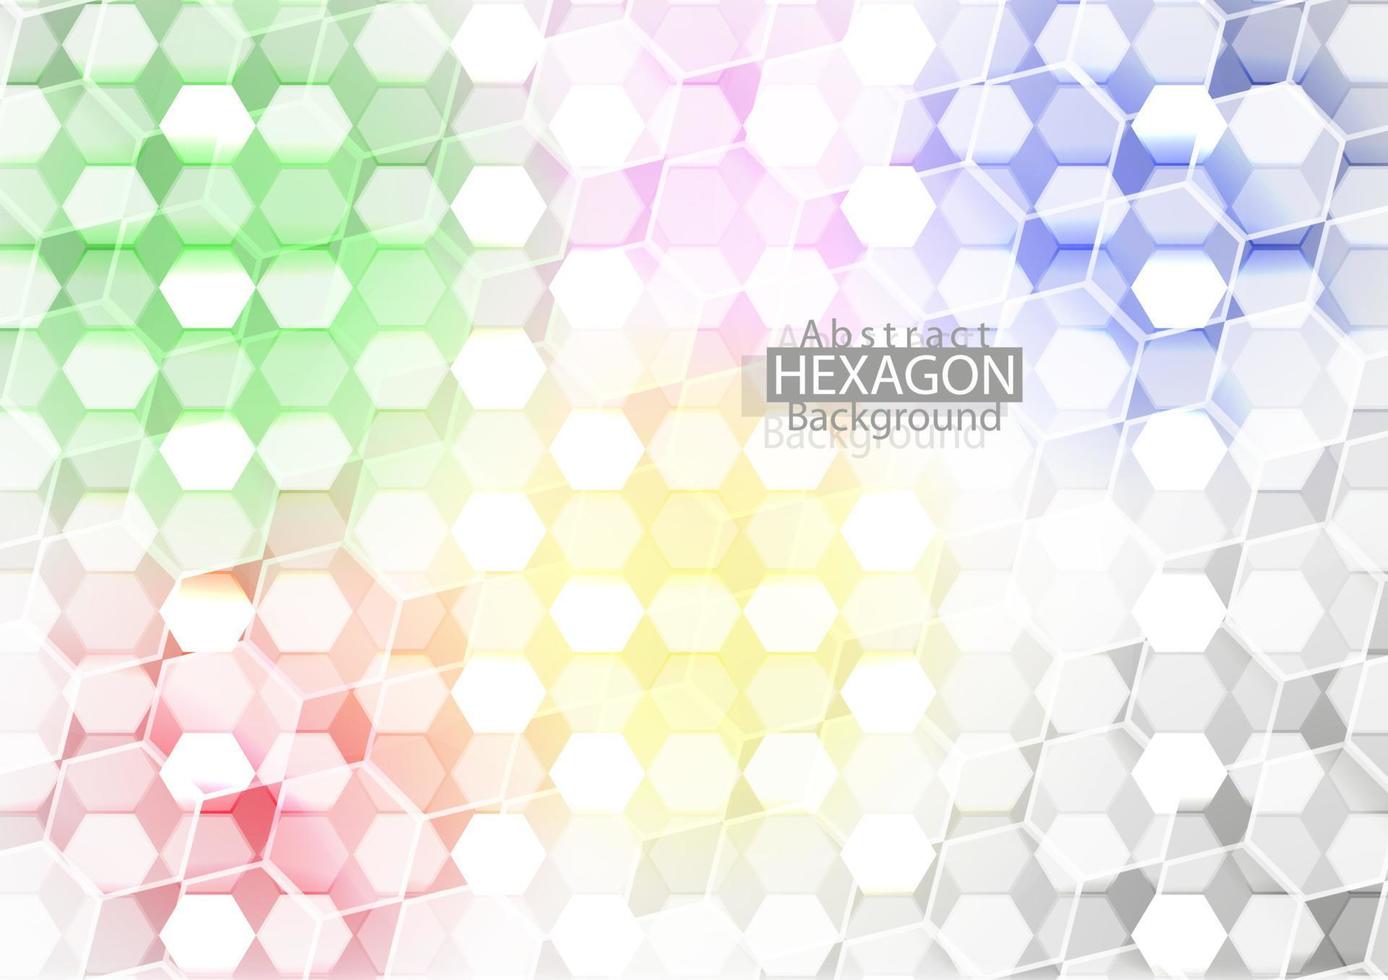 Abstract hexagon background. Glittering Geometric Shapes. Vector illustration.